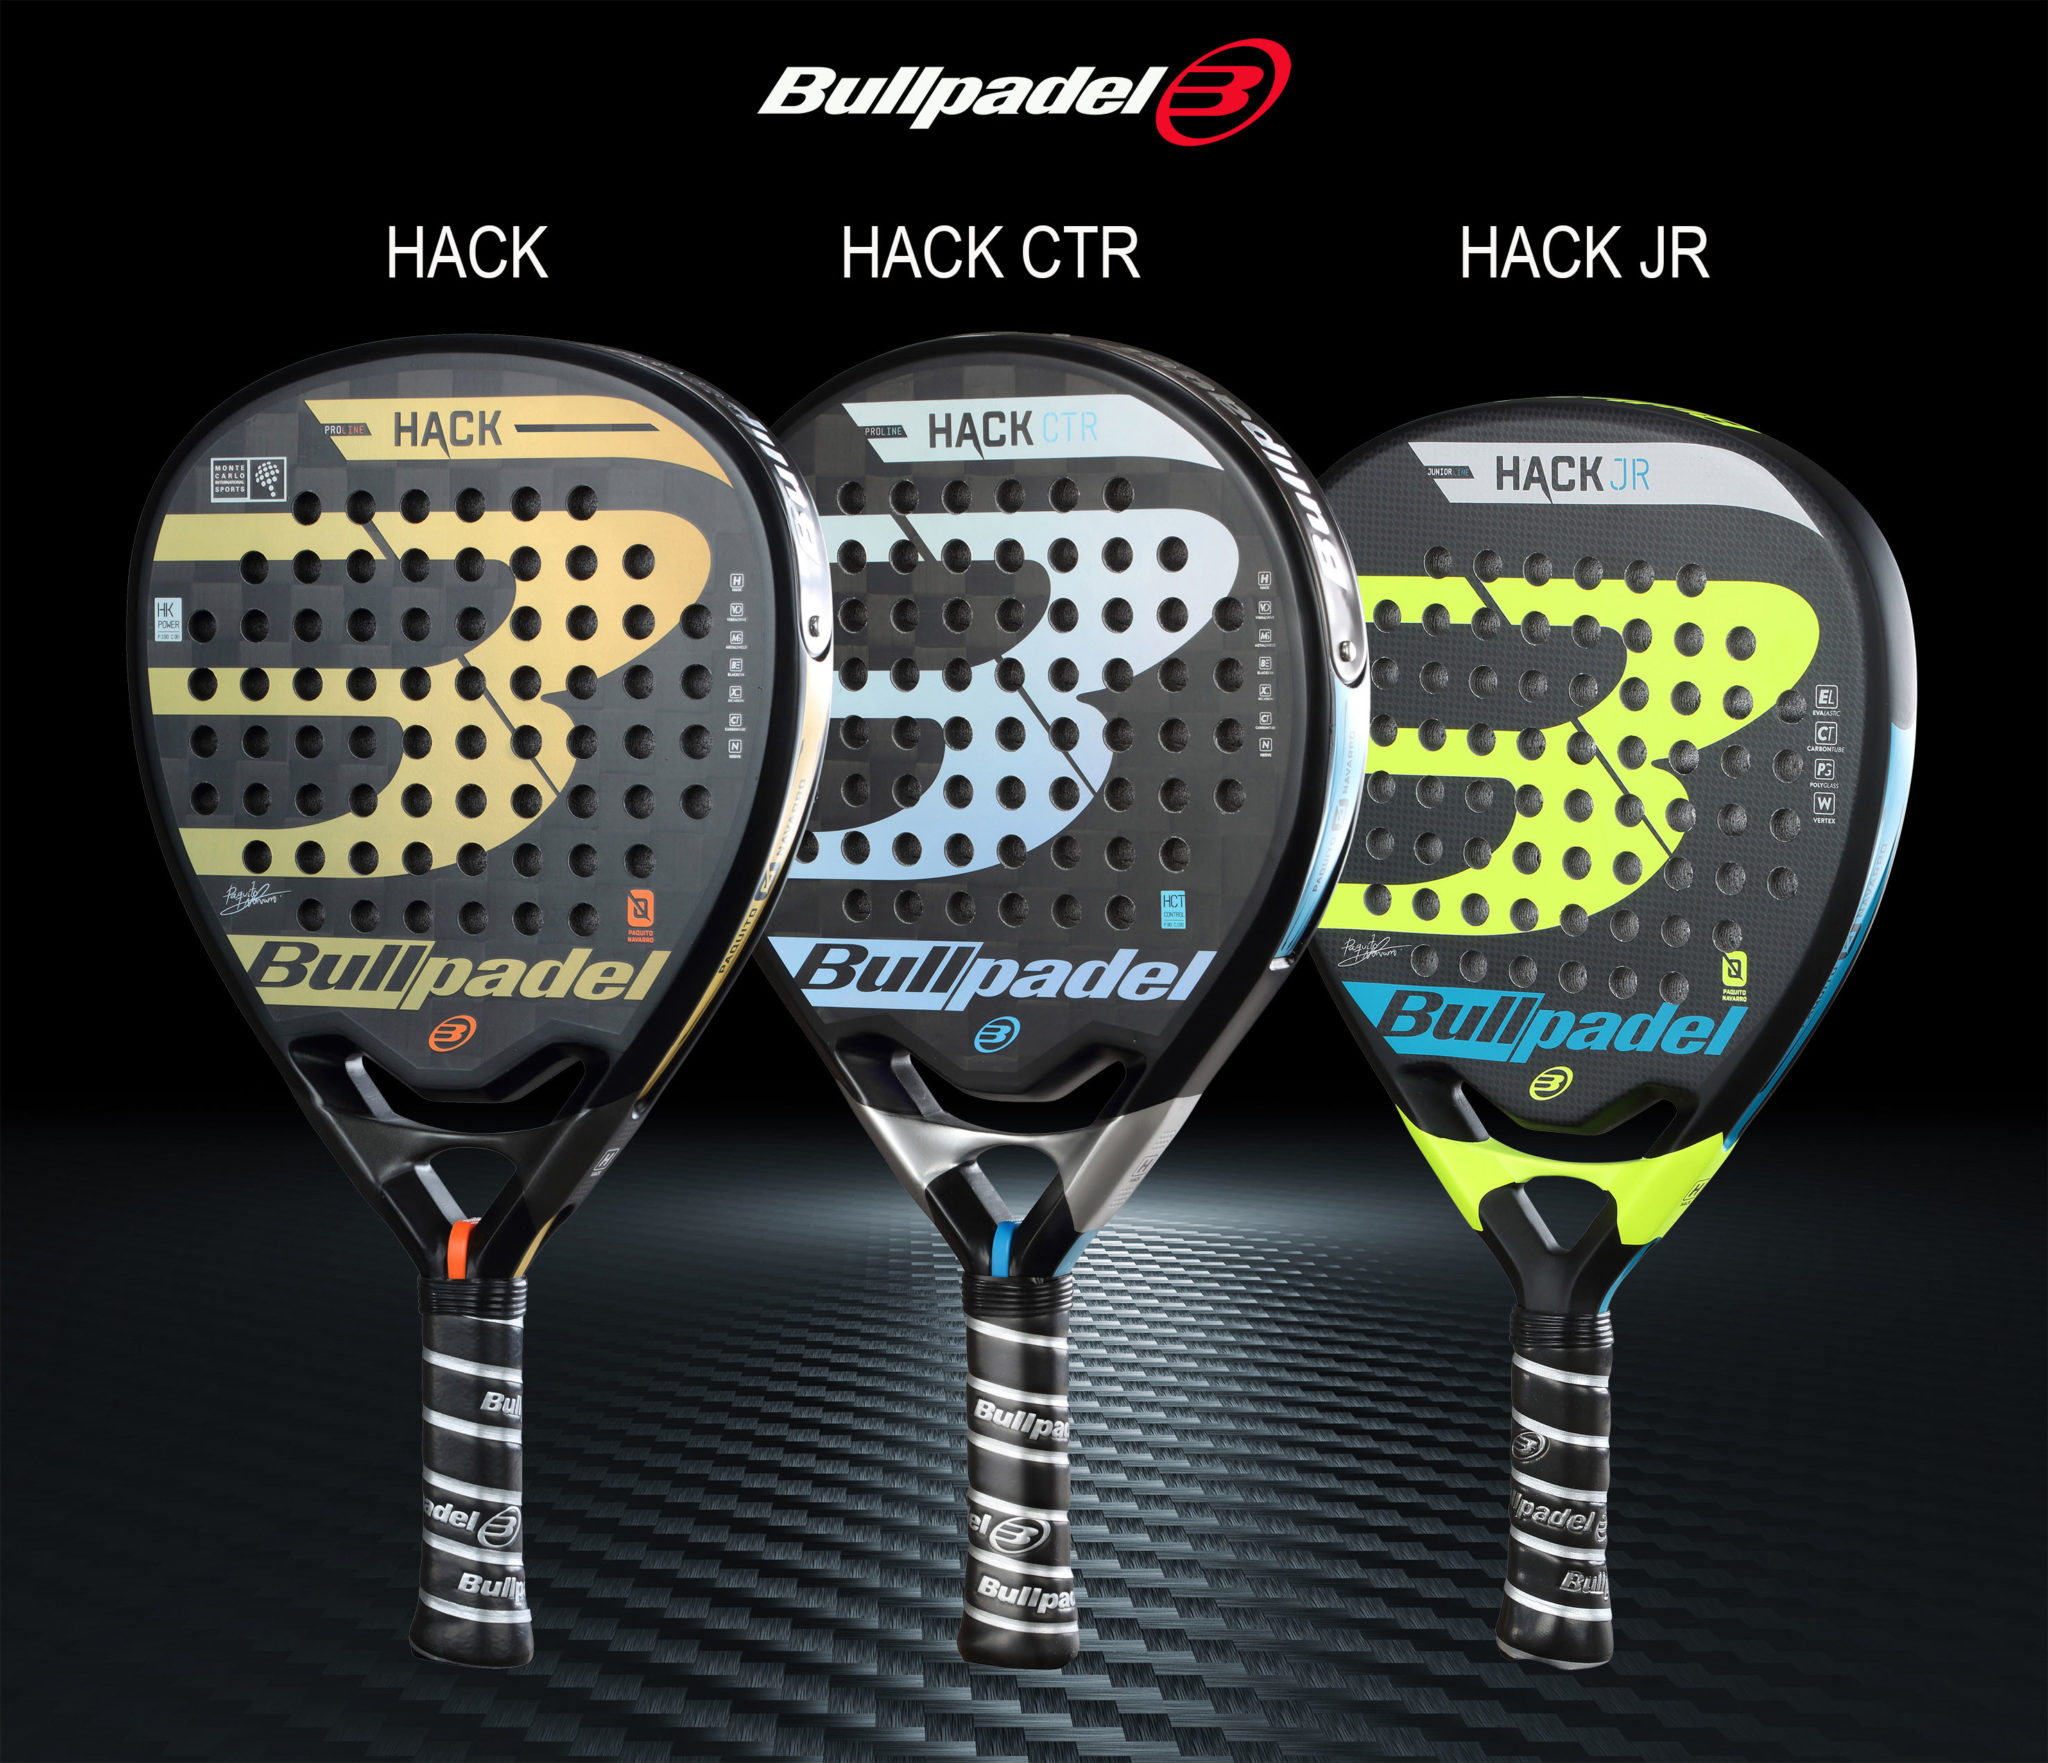 The family is growing for the Hack range -BULLPADEL